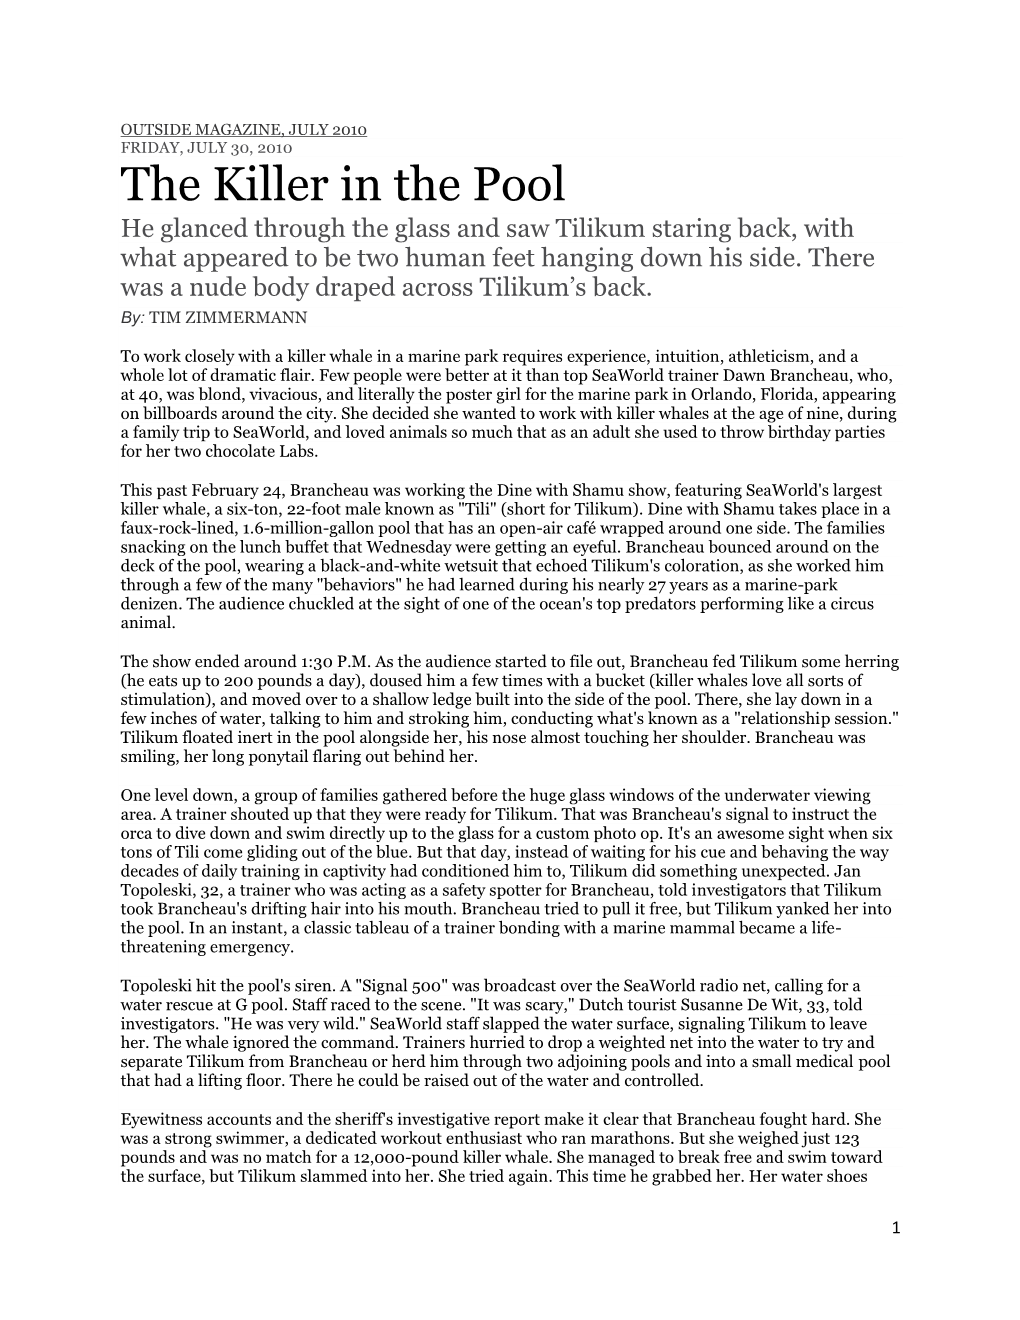 The Killer in the Pool He Glanced Through the Glass and Saw Tilikum Staring Back, with What Appeared to Be Two Human Feet Hanging Down His Side